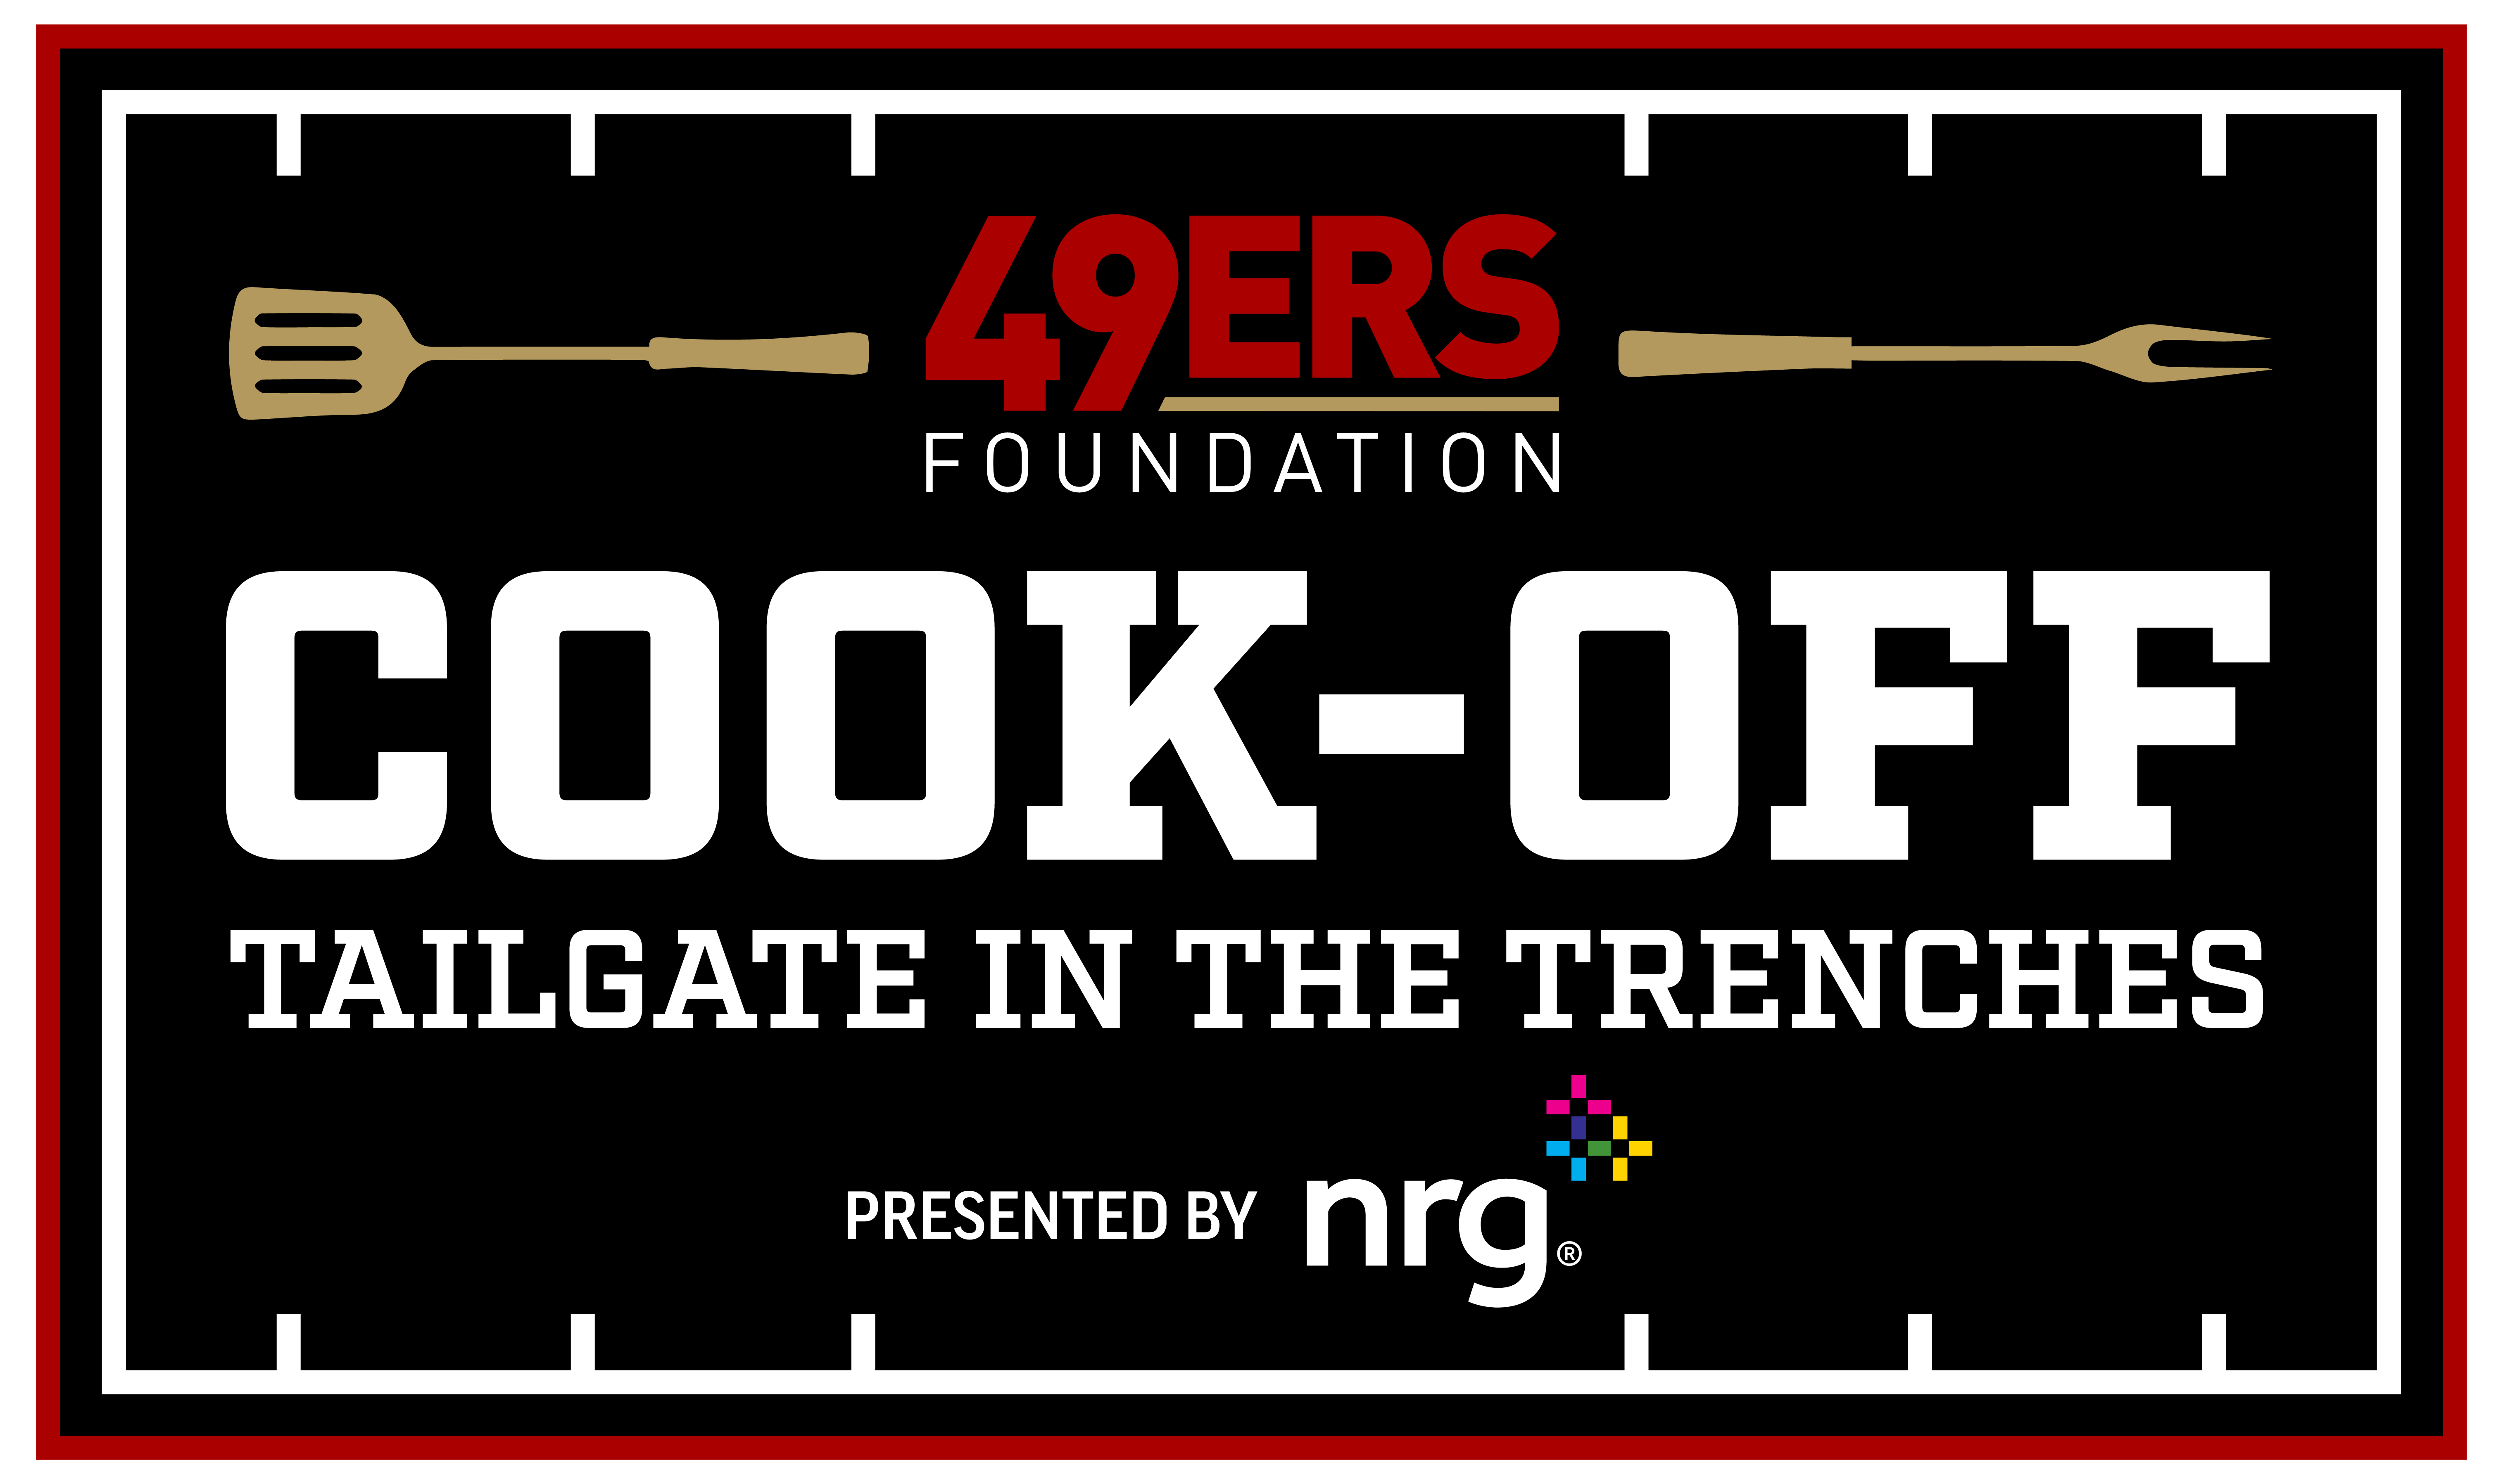 San Francisco 49ers' foundation draws up new play for long-term giving game  - San Francisco Business Times